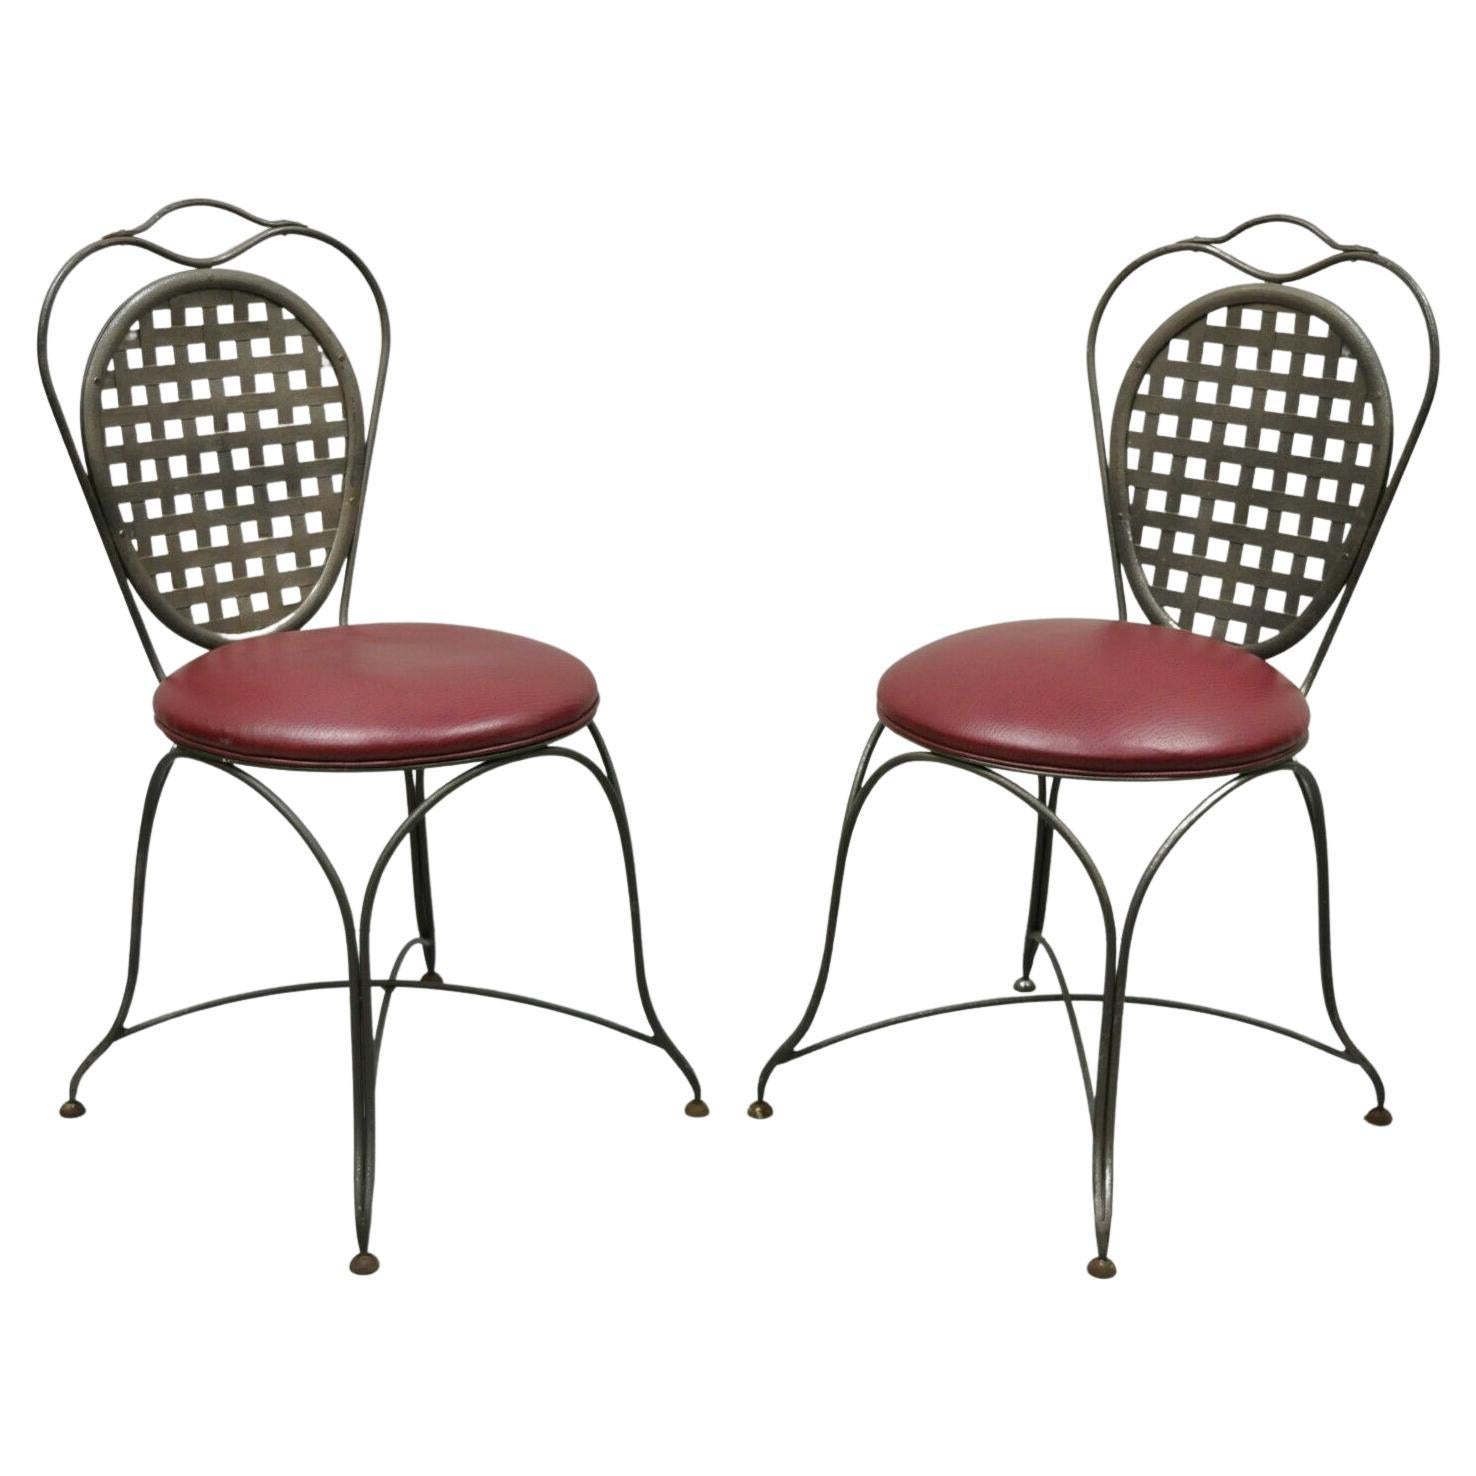 Italian Regency Style Wrought Iron Sunroom Lattice Round Seat Chairs, a Pair For Sale